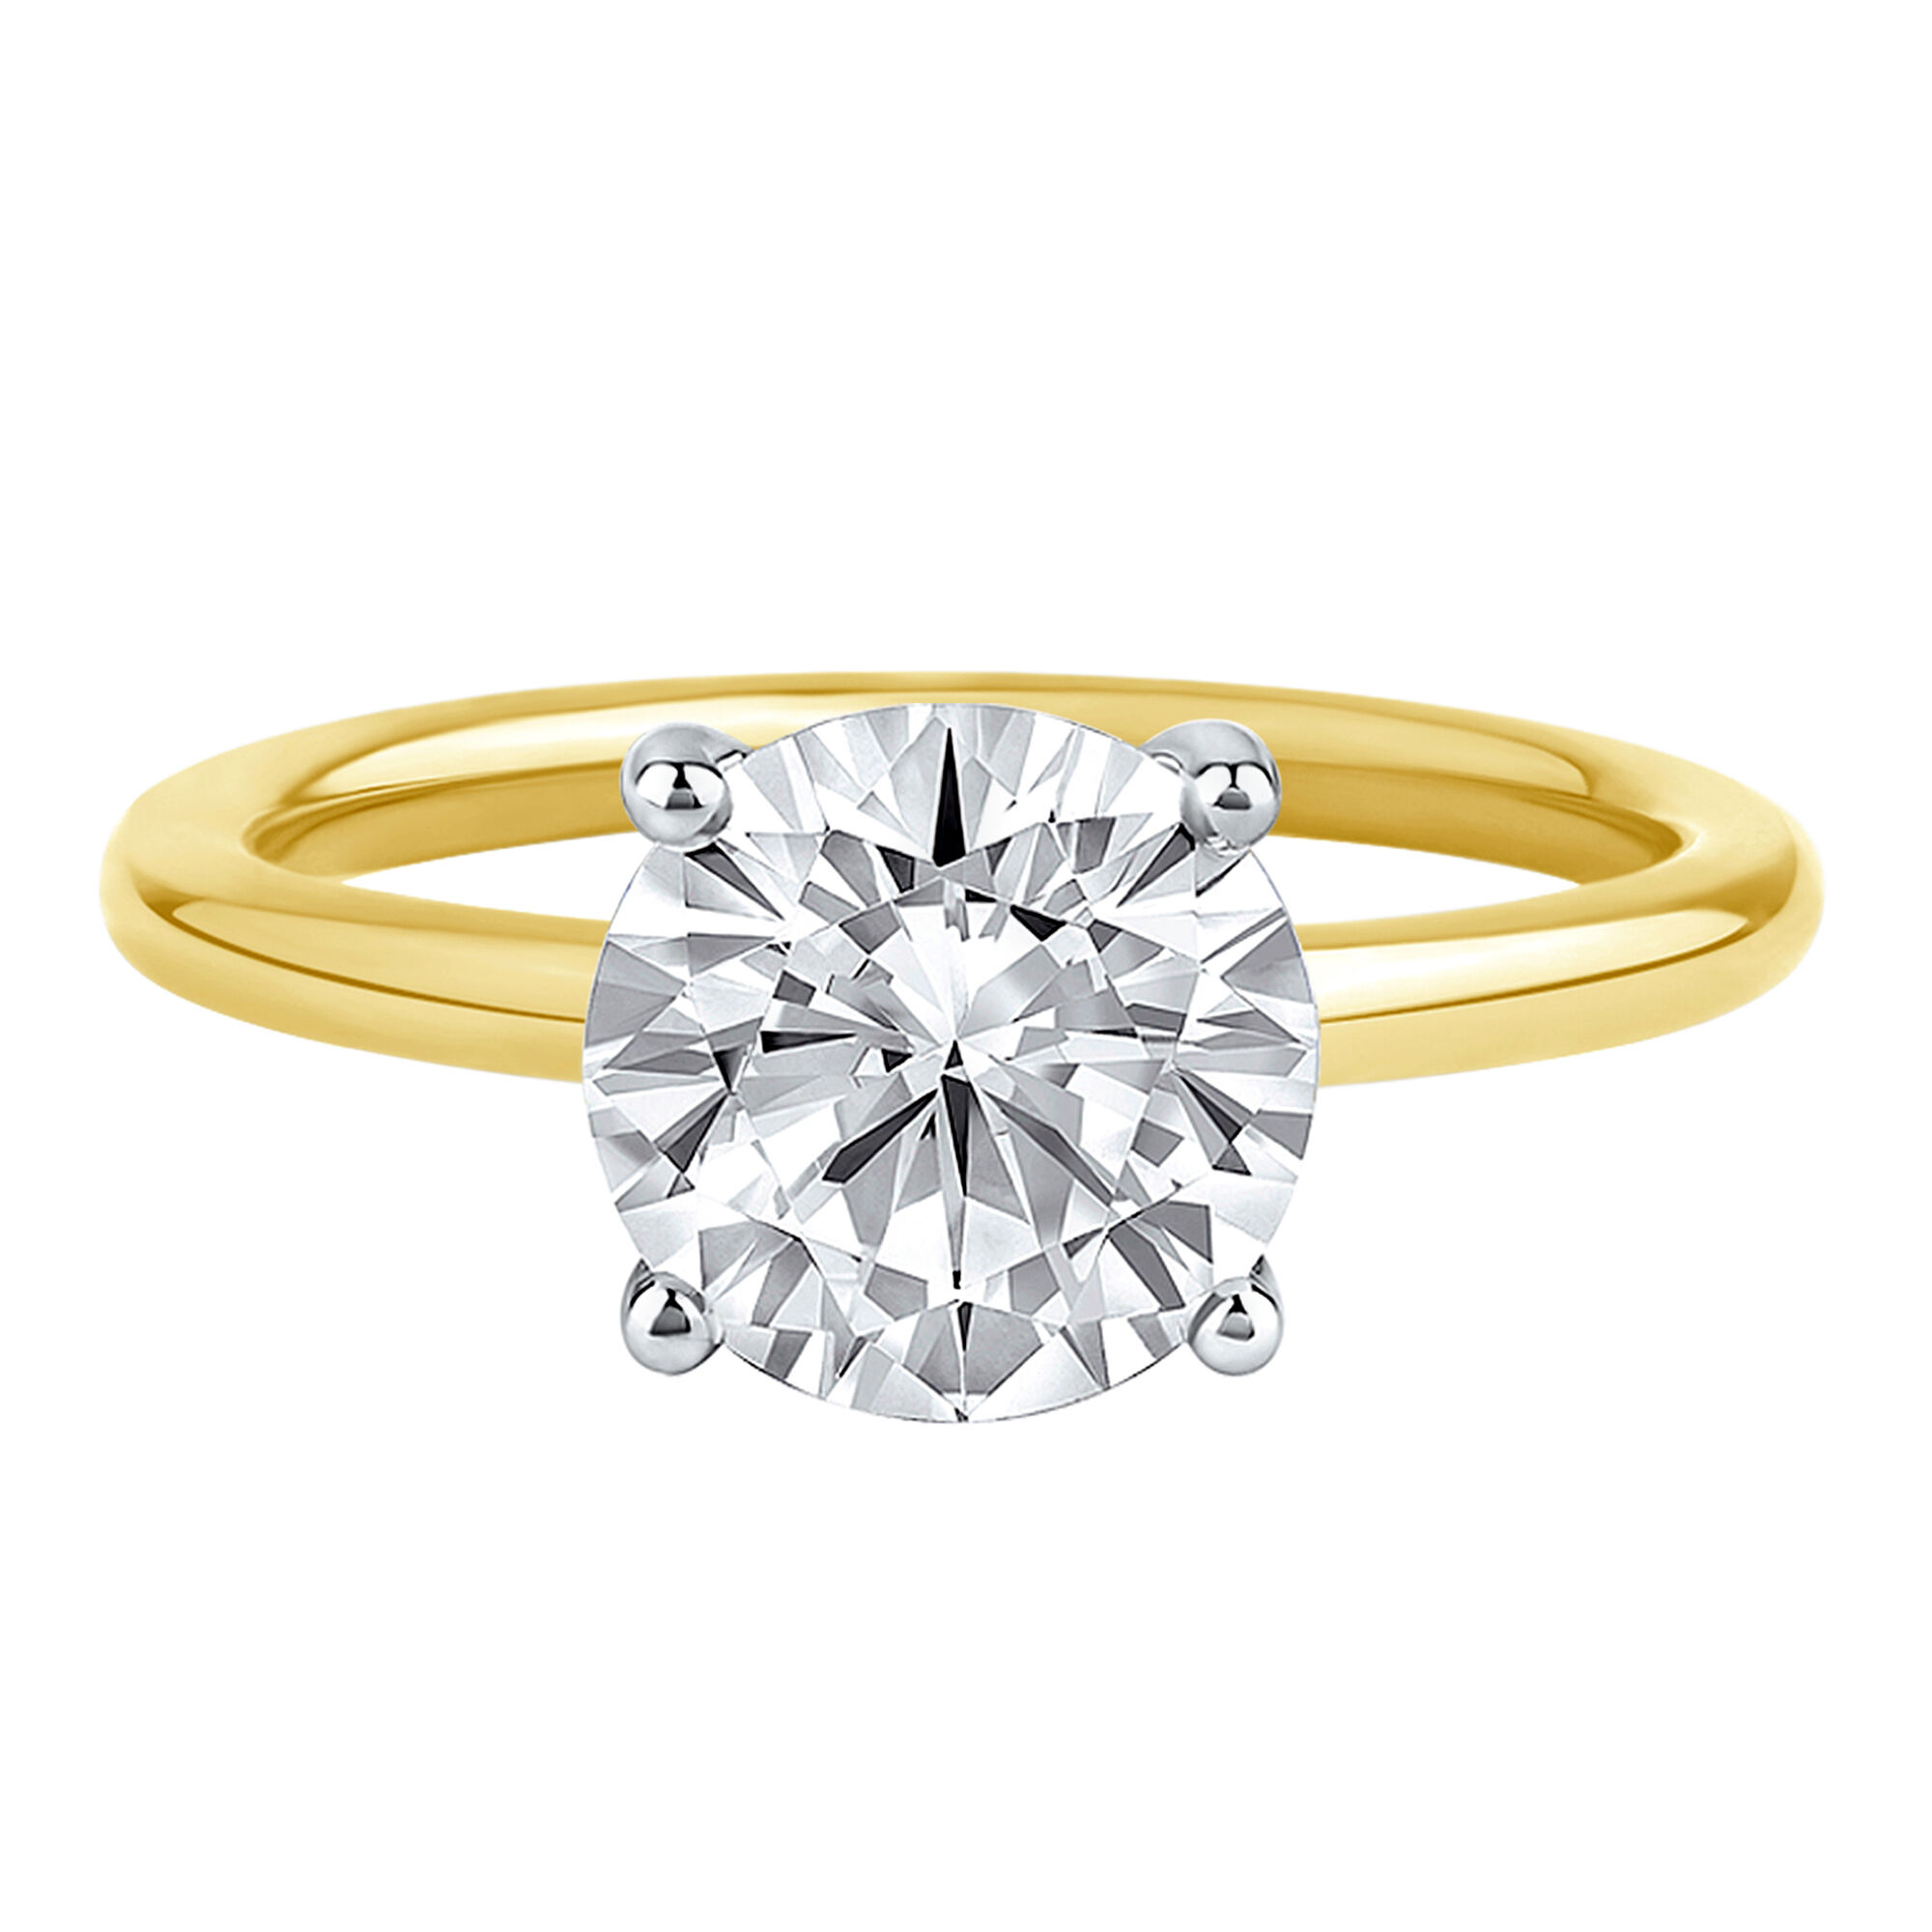 What Karat Gold Is Best For Wedding & Engagement Rings?